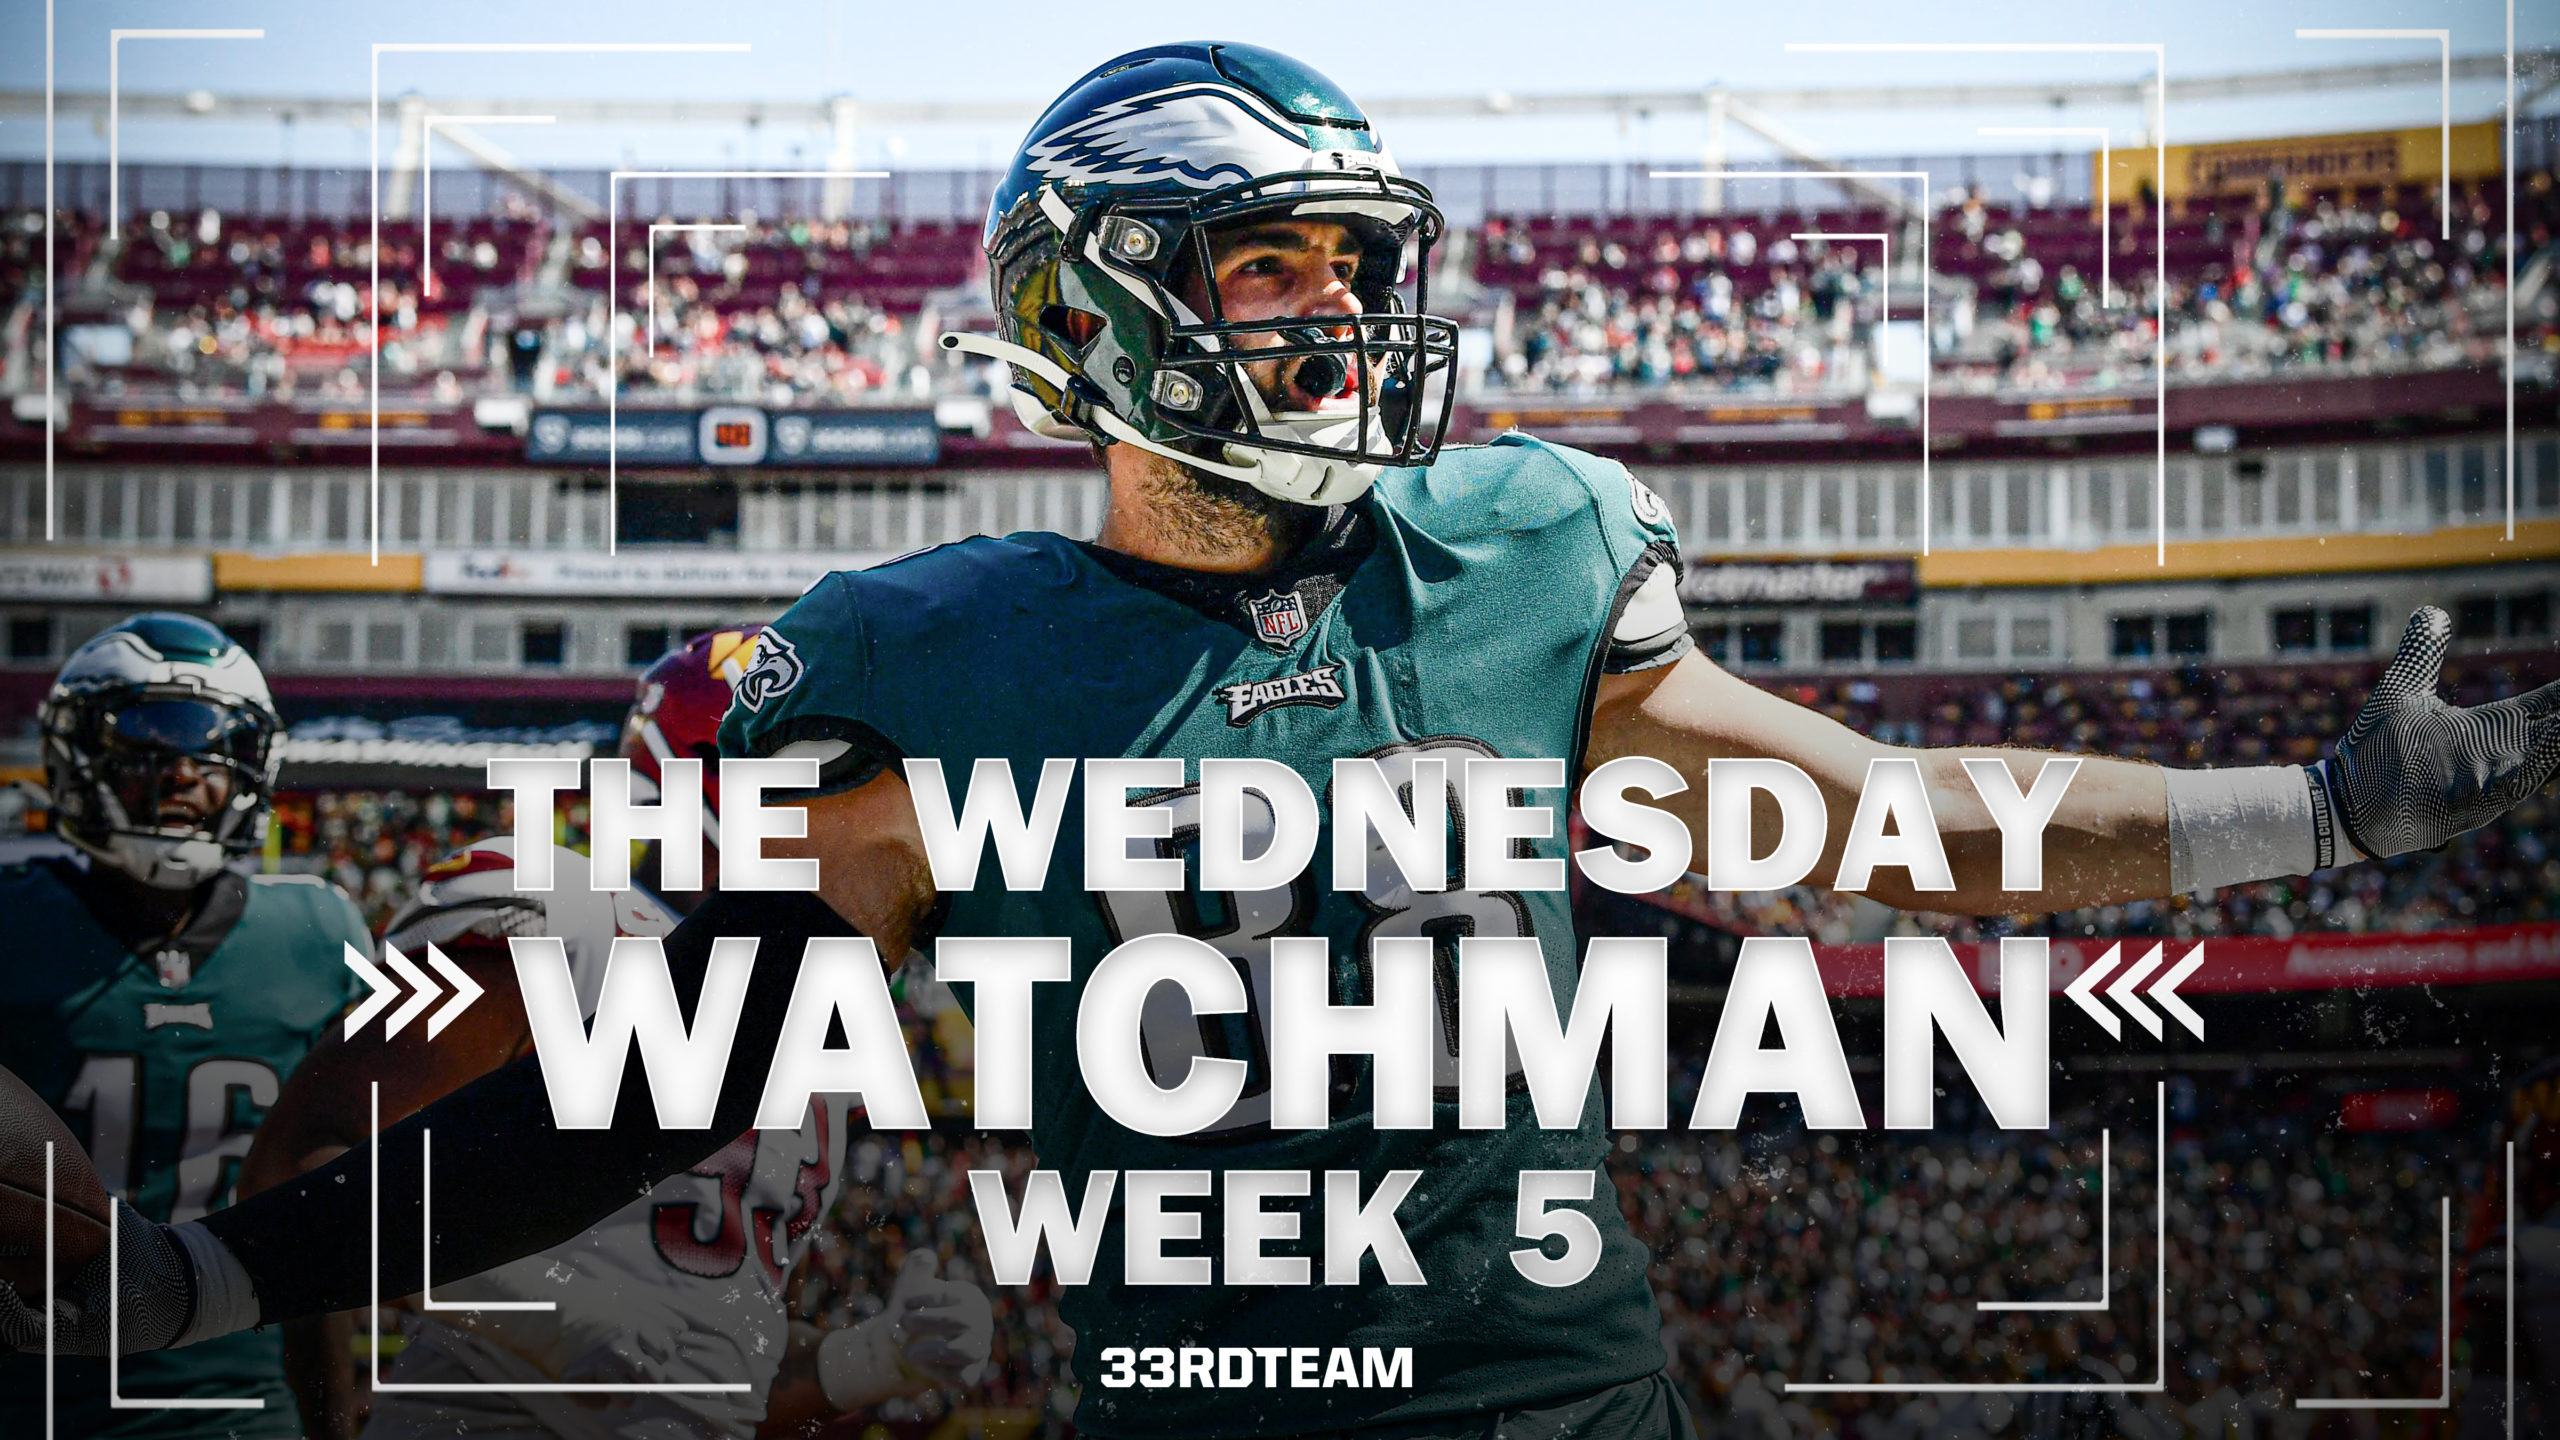 The Wednesday Watchman: NFL Week 5 Betting, DFS and Fantasy Information to Know